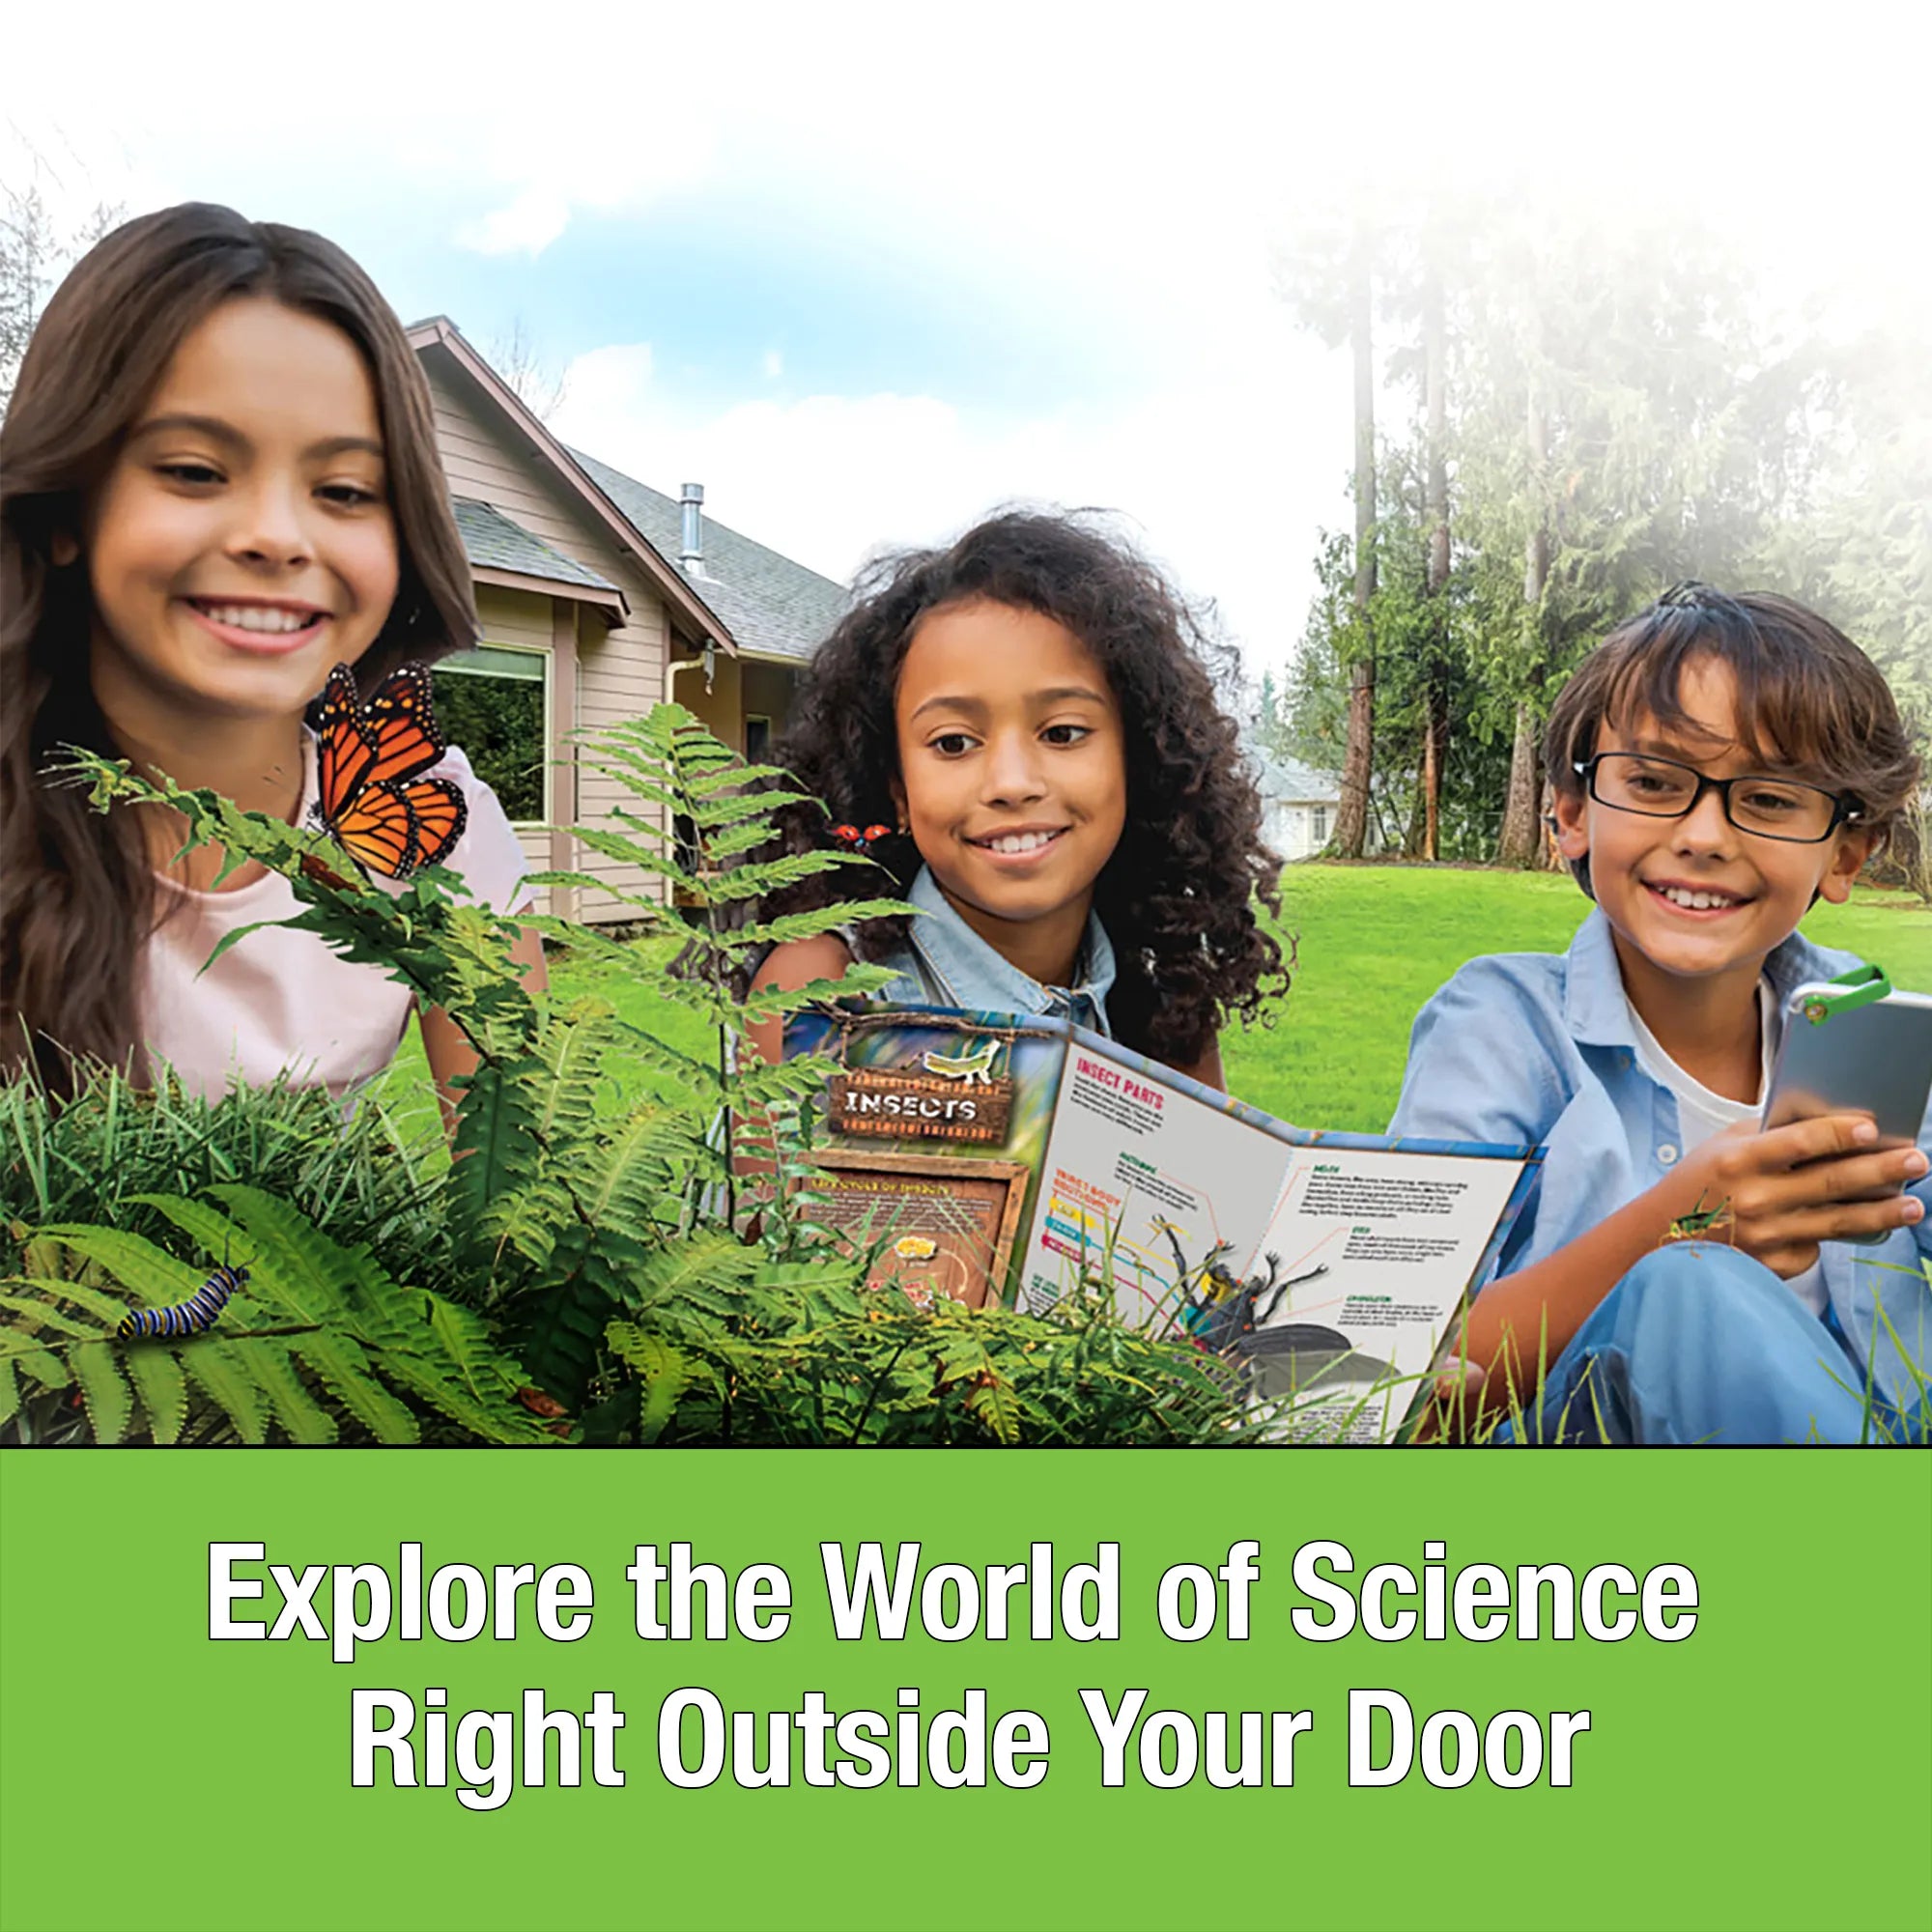 SmartLab Outdoor Science Lab - 20 Hands-On Nature Activities - Age 8+ - Brown's Hobby & Game